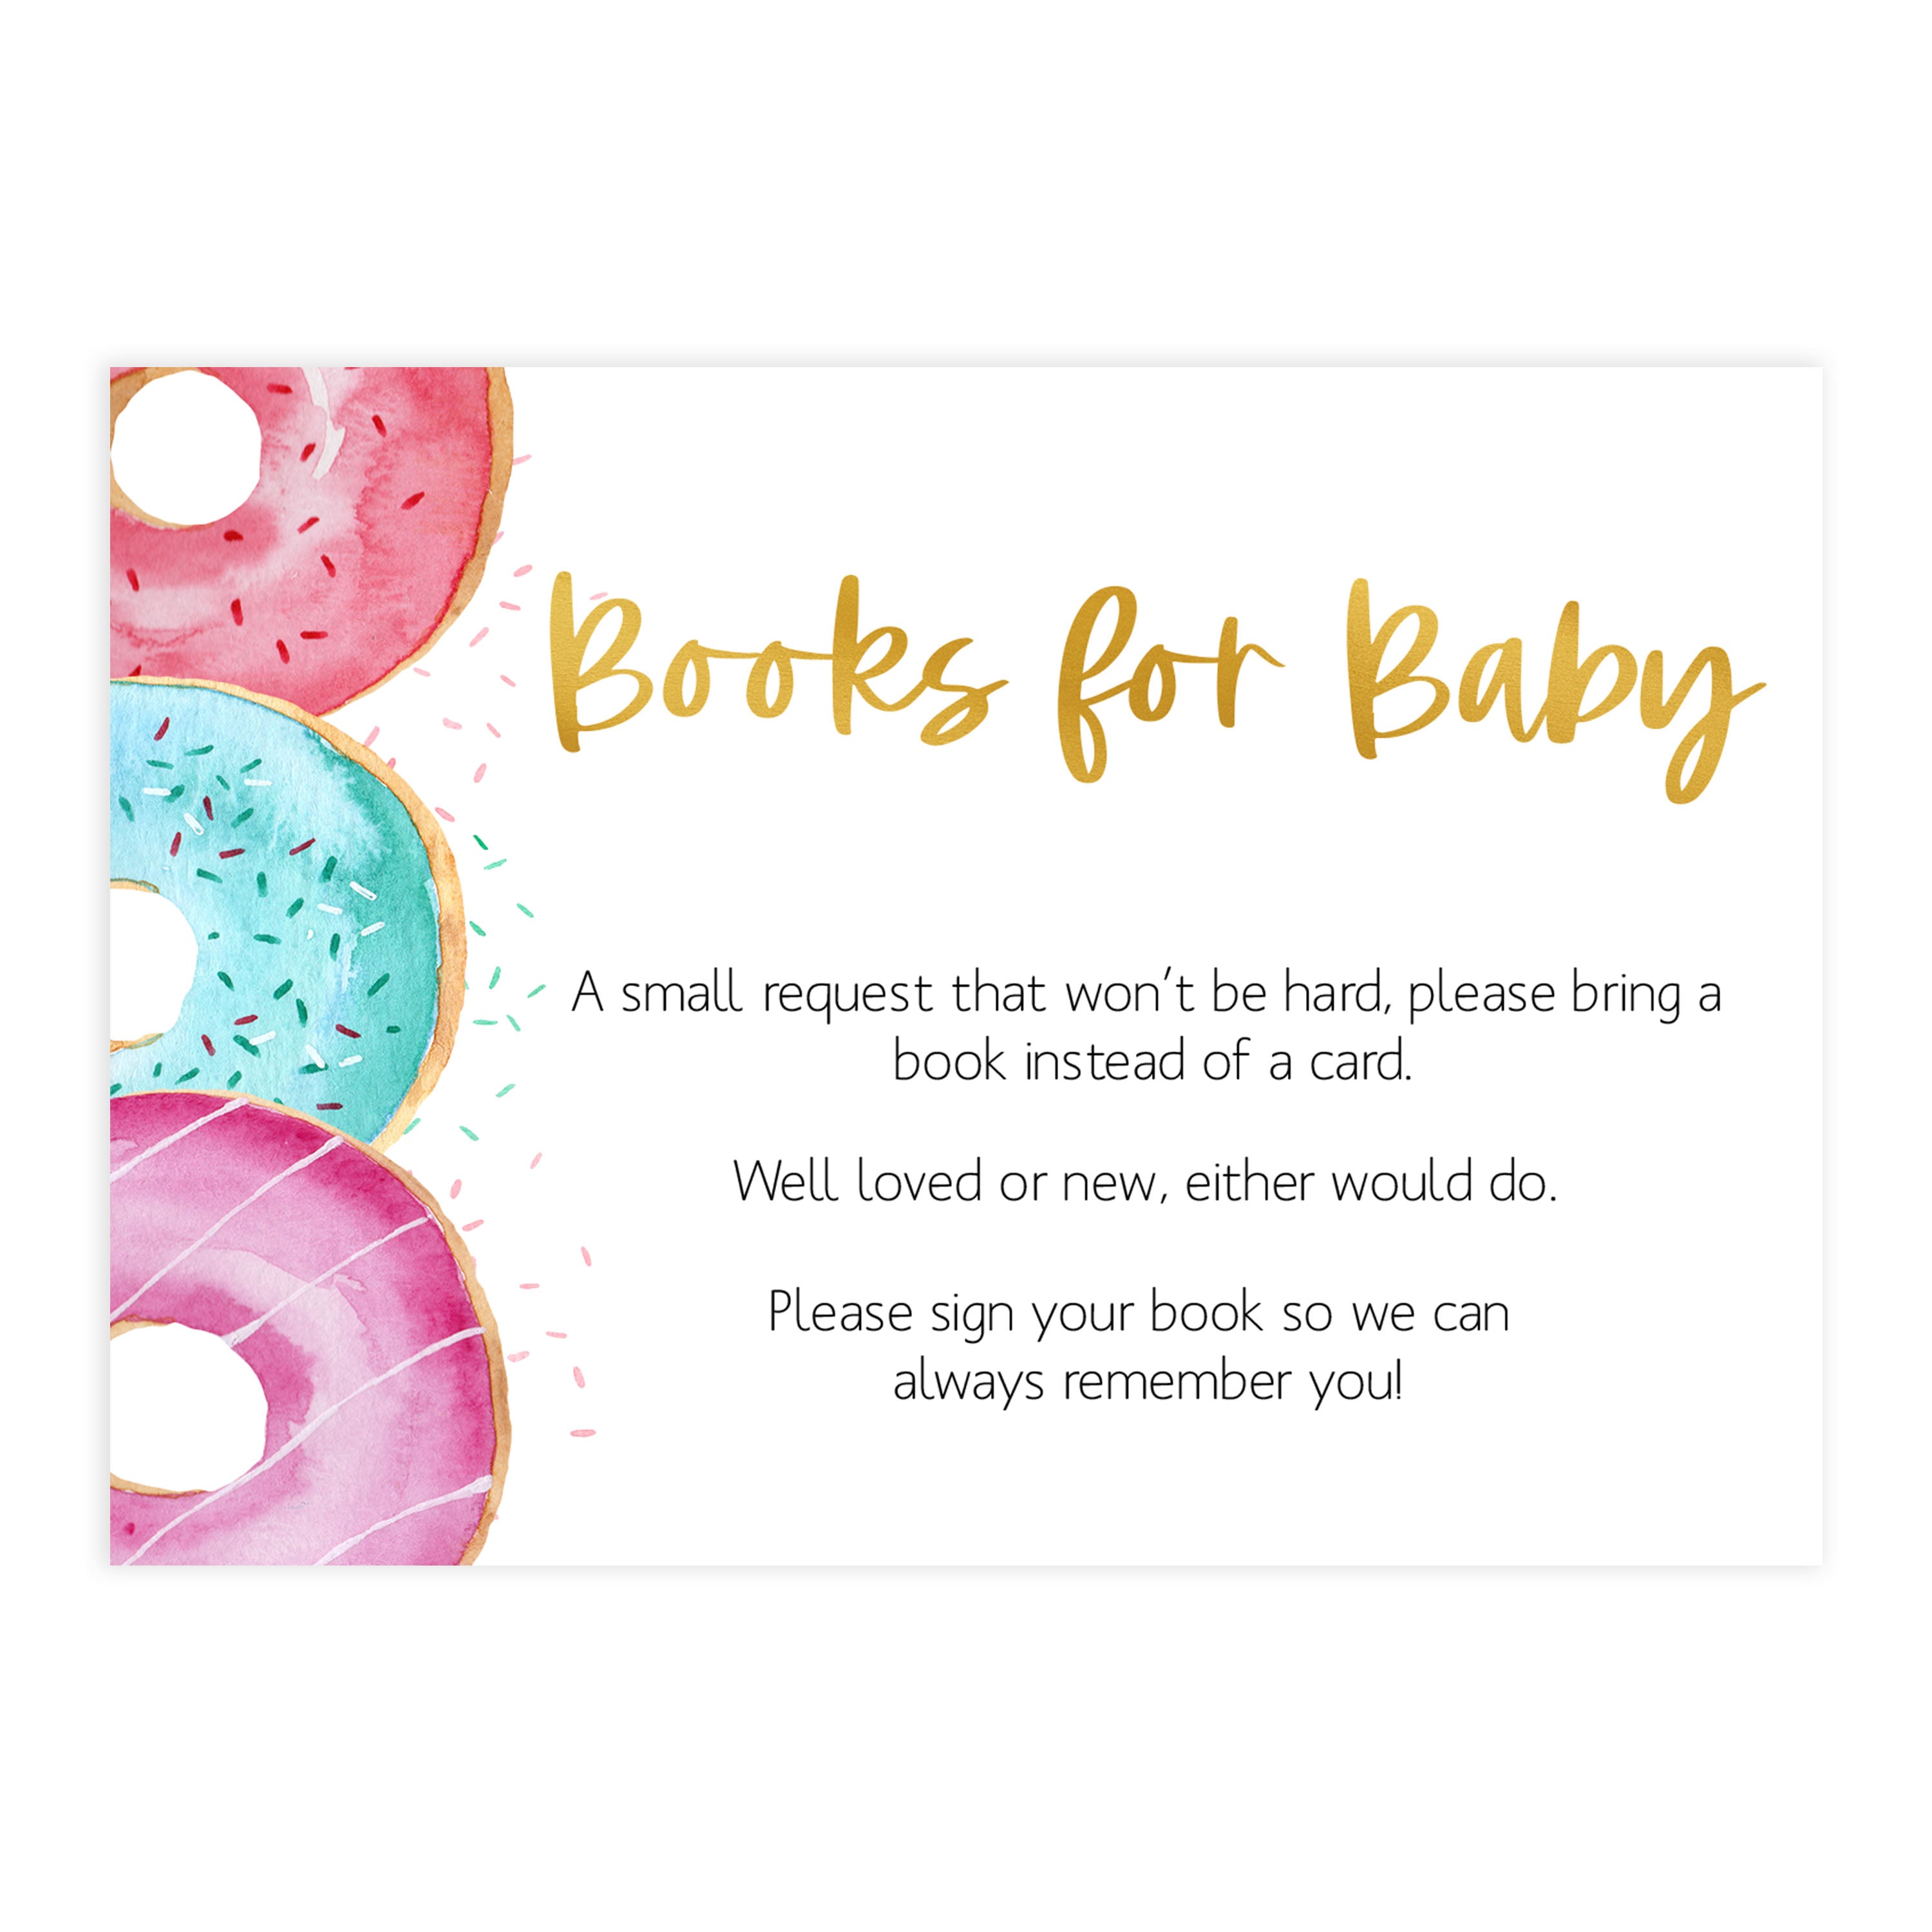 books for baby, bring a book card, Printable baby shower games, donut baby games, baby shower games, fun baby shower ideas, top baby shower ideas, donut sprinkles baby shower, baby shower games, fun donut baby shower ideas